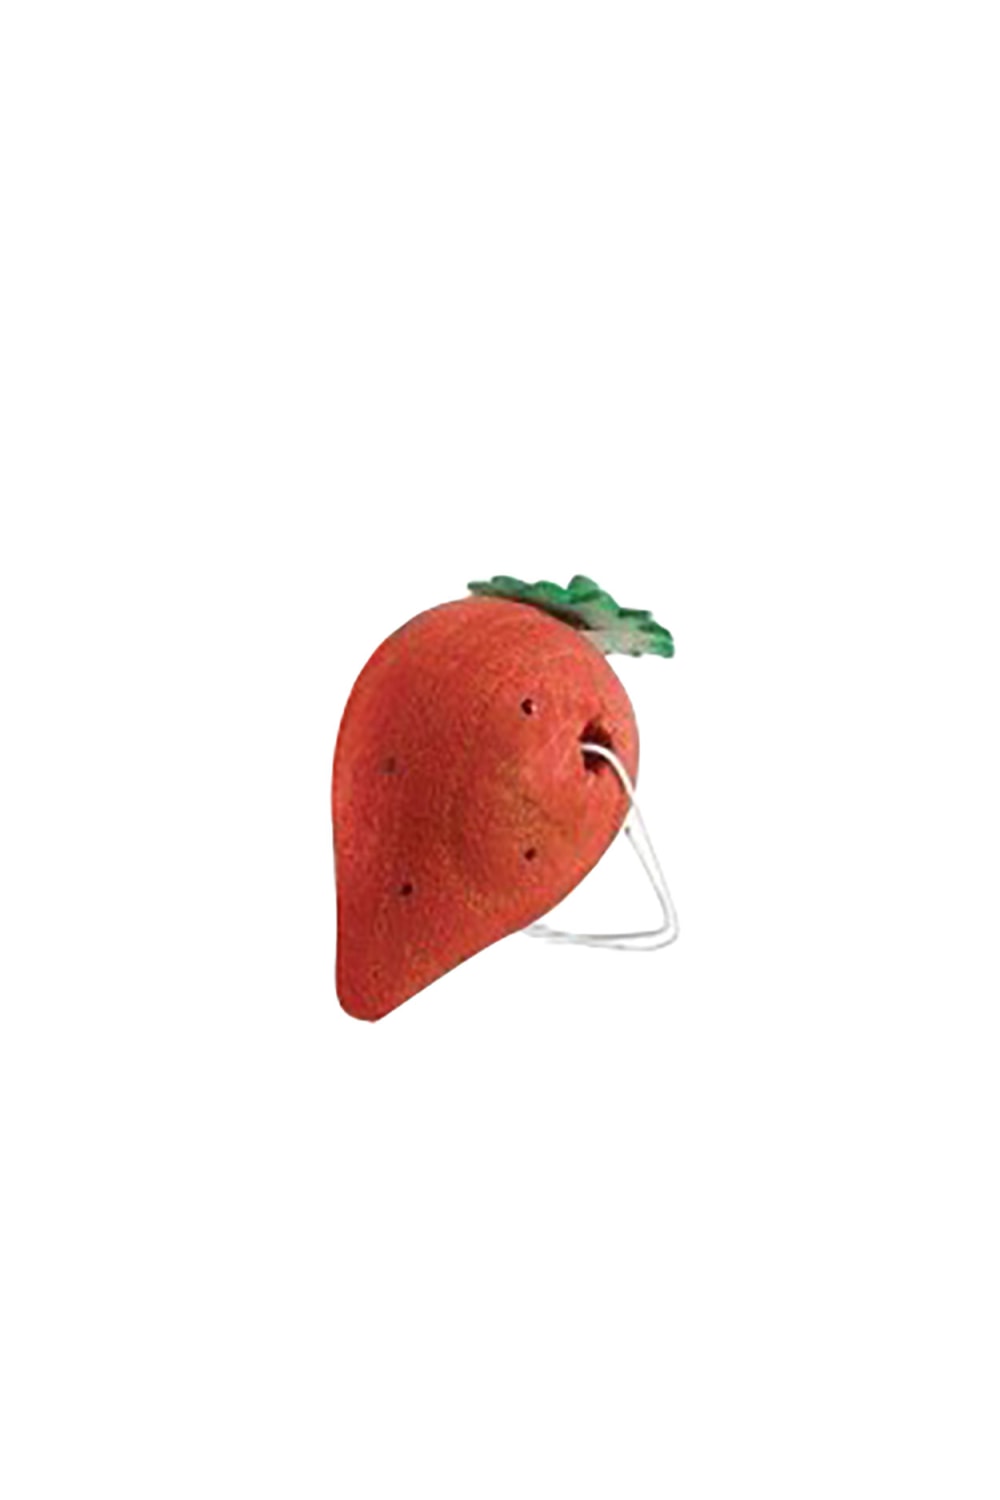 Small N Furry Gnaw T Strawberry Toy (May Vary) (2 inch)